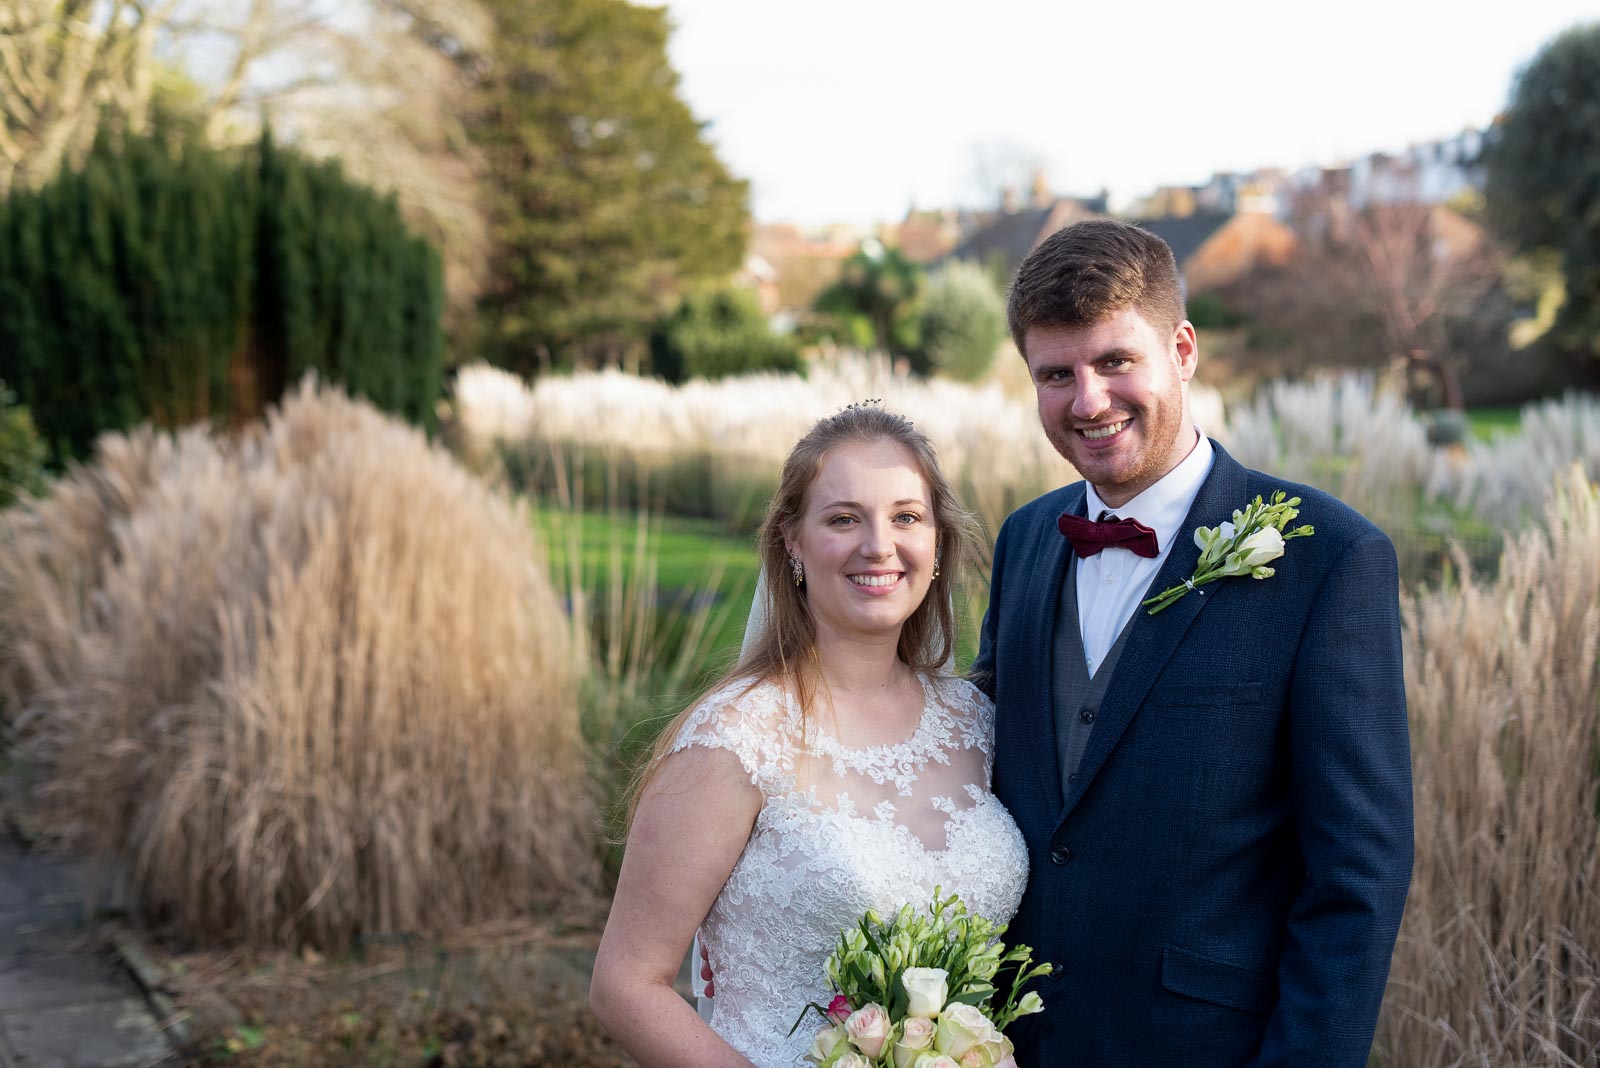 Belinda and Chris pose in Southover Grange after their wedding at Lewes Register Office.